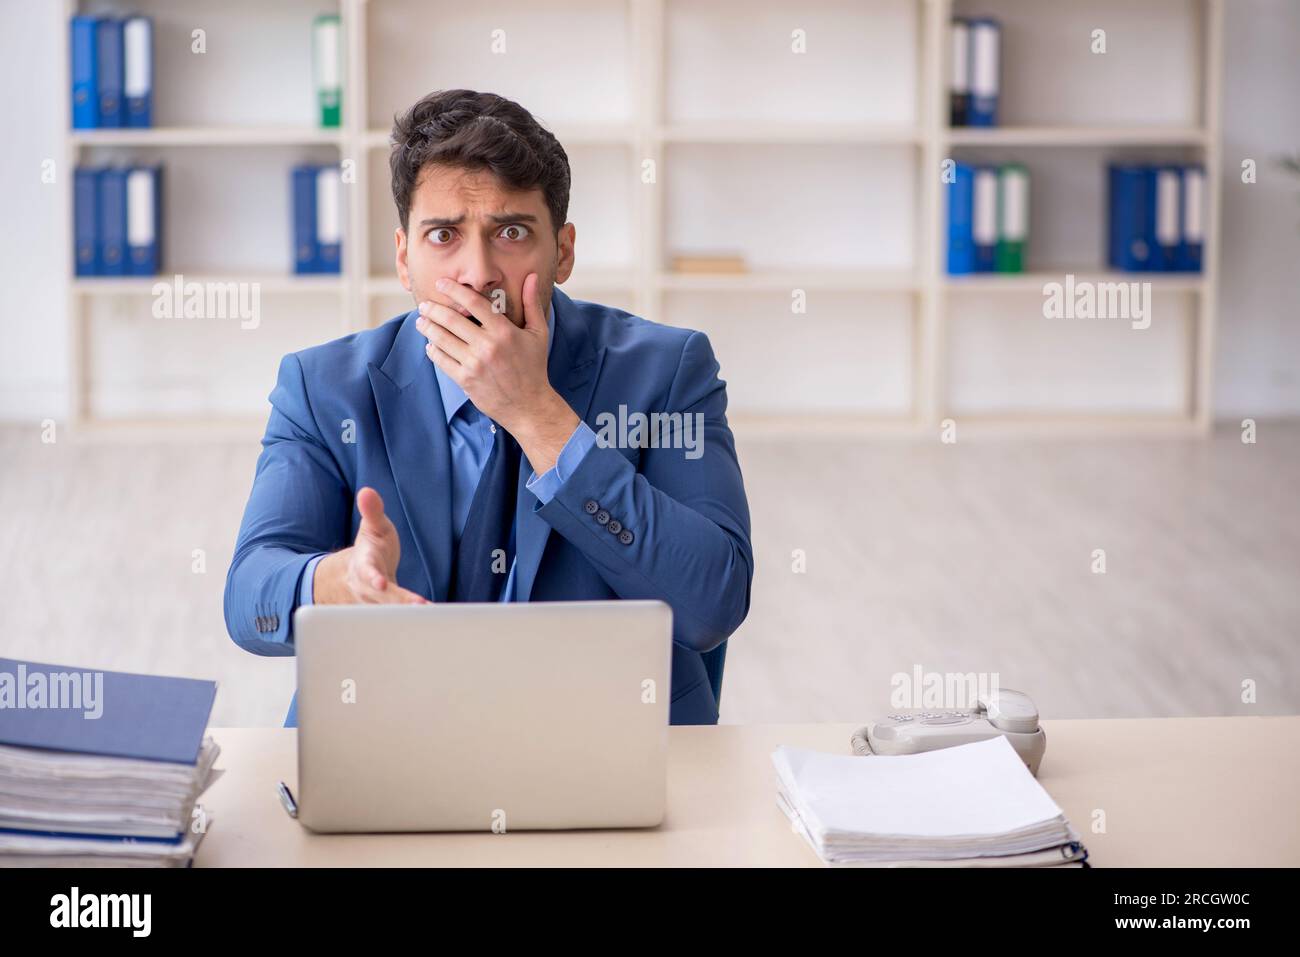 Young employee working at workplace Stock Photo